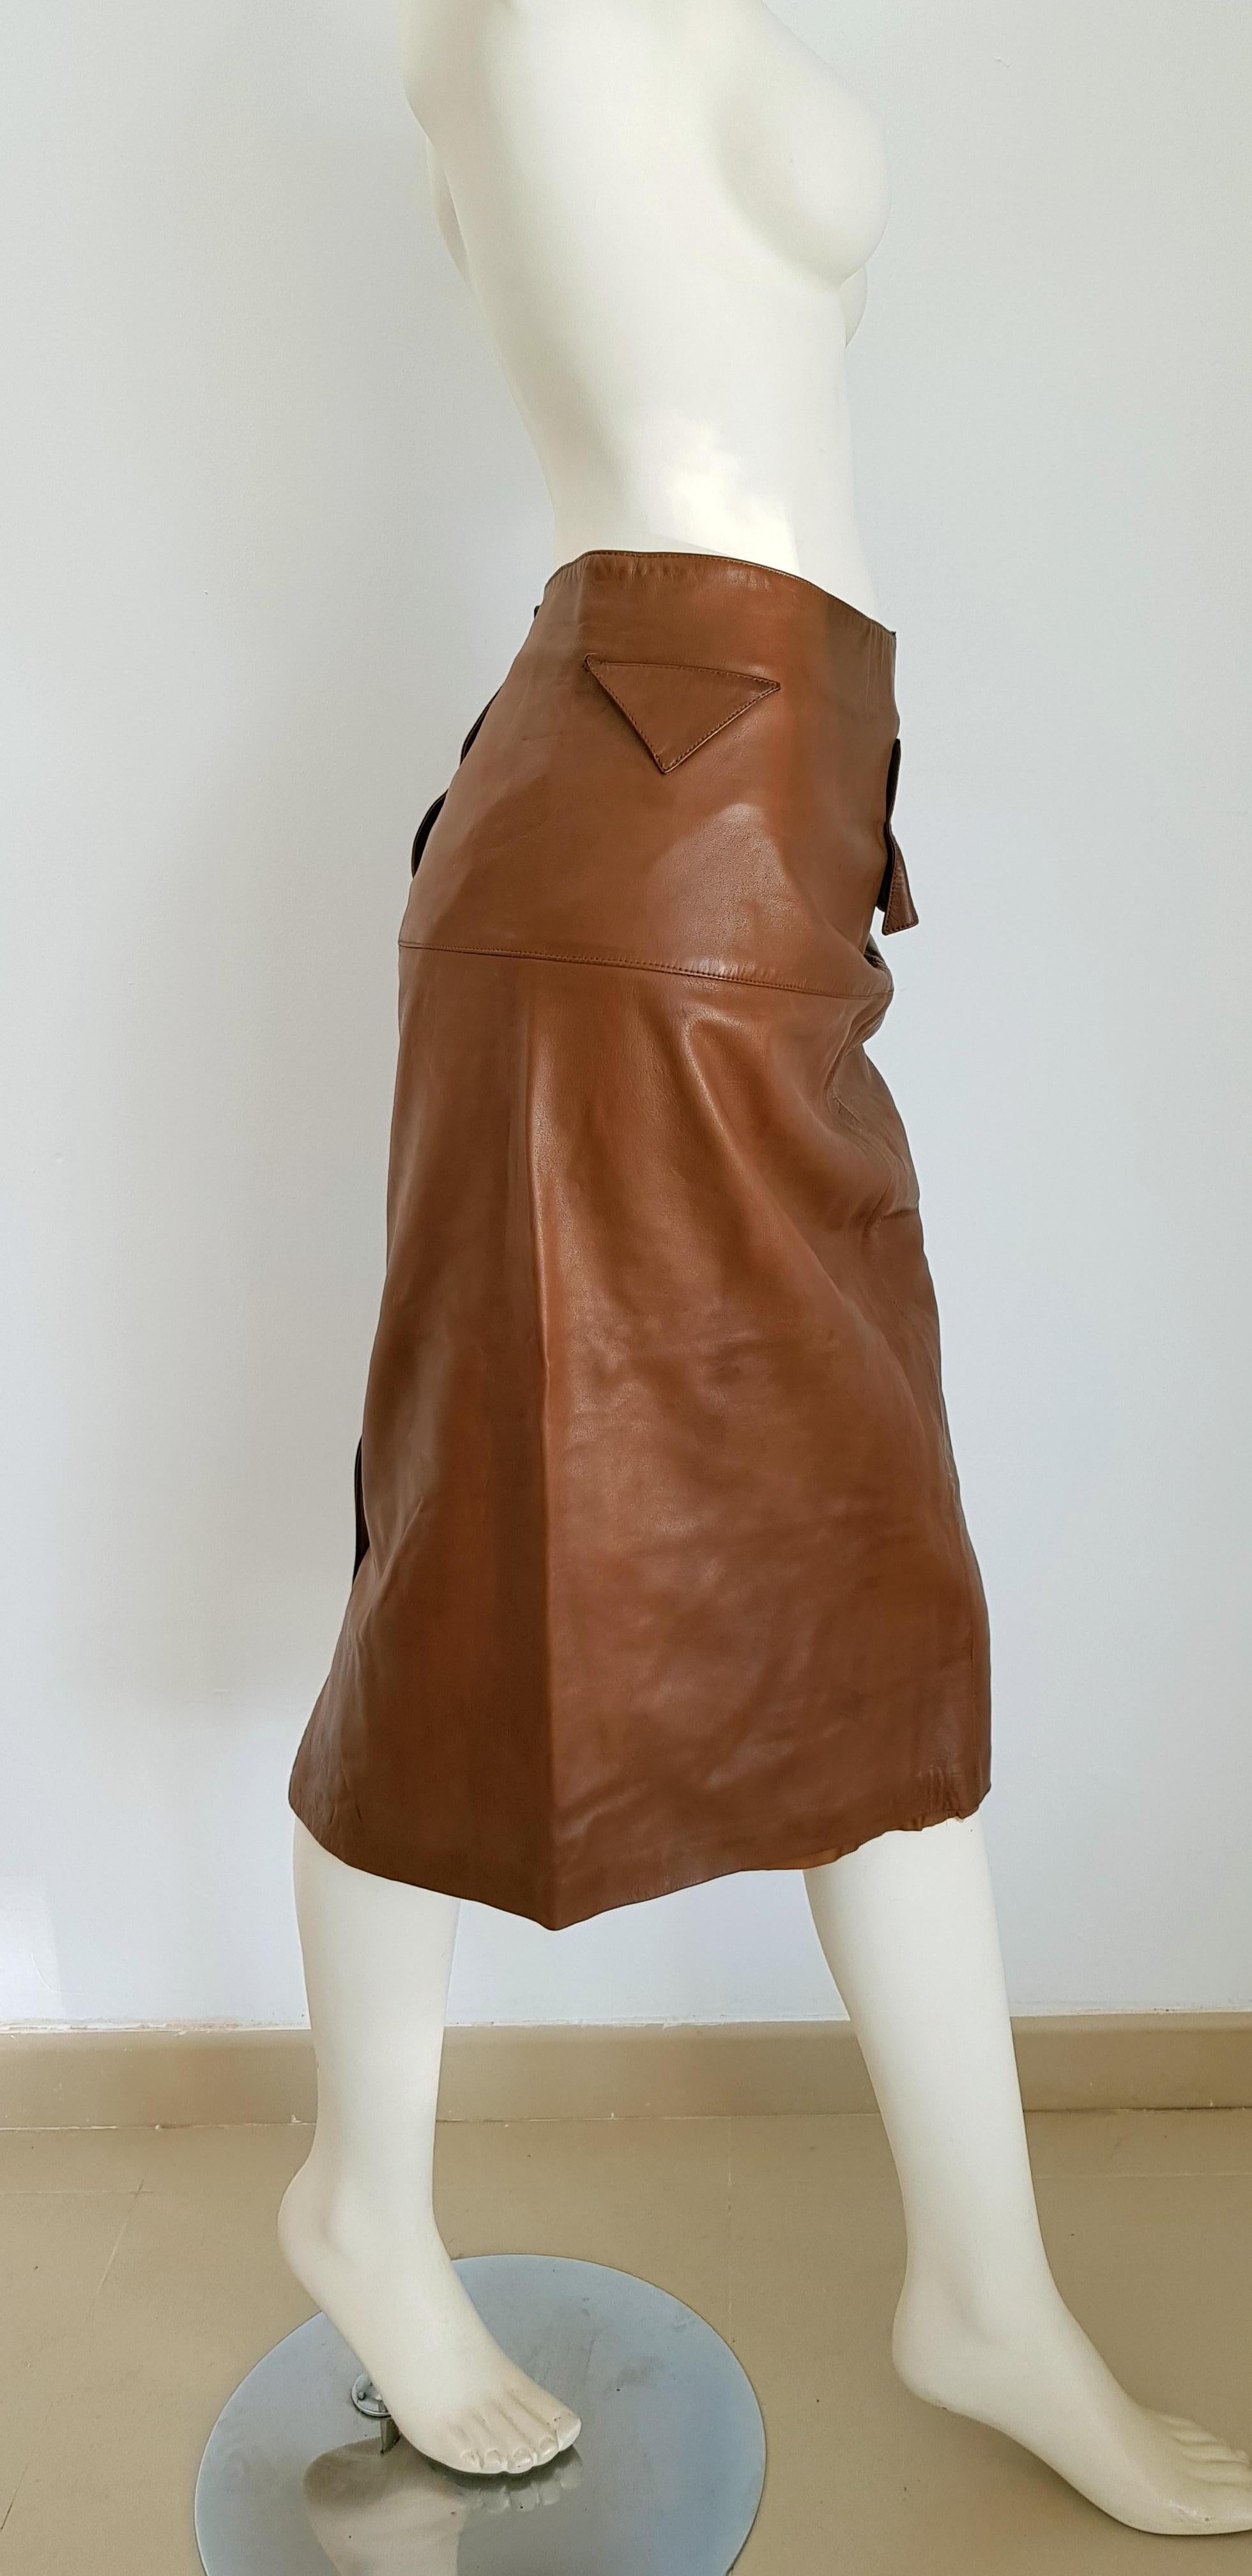 Claude MONTANA brown, buttons on the back, leather skirt - Unworn, New.

SIZE: equivalent to about Small / Medium, please review approx measurements as follows in cm: lenght 70, waist circumference 74, hip circumference 95.
TO CONVERT: cm x 0.39 =